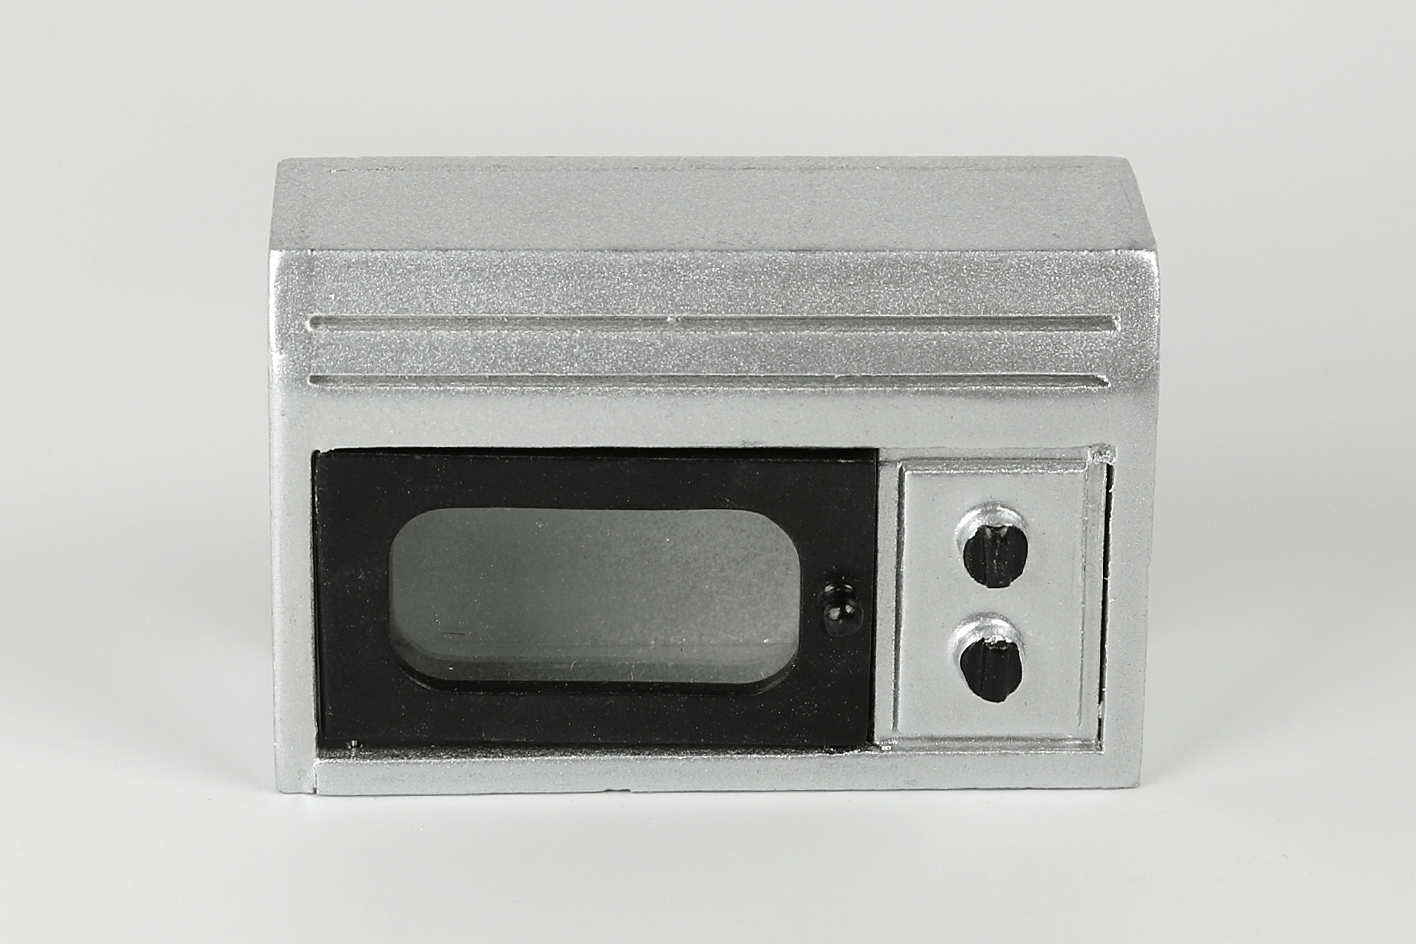 Microwave in Silver